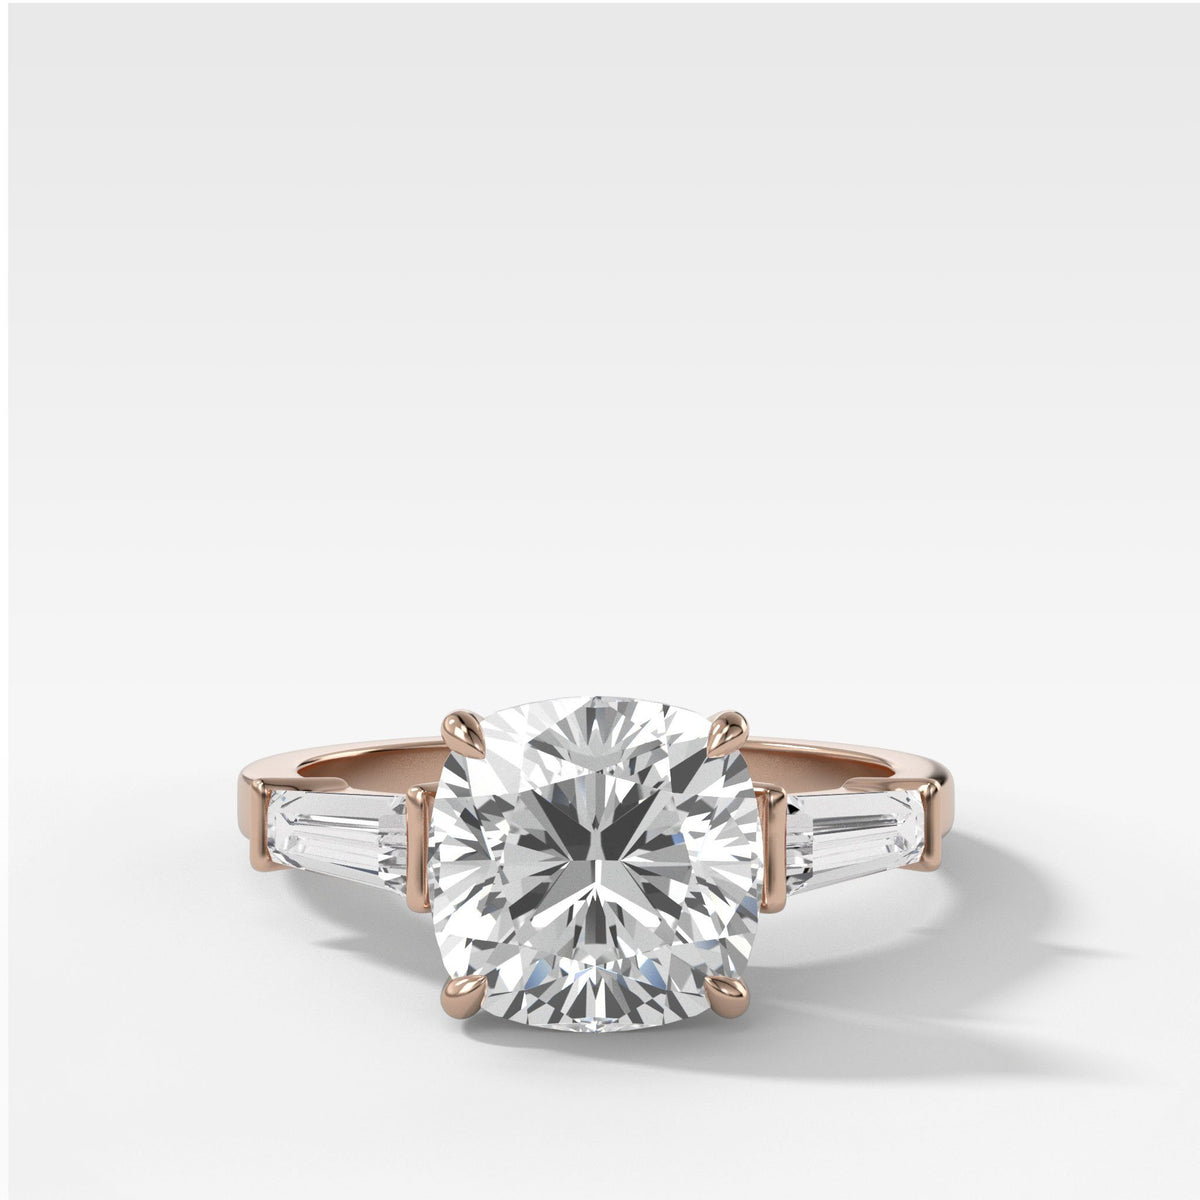 Translunar Tapered Baguette Engagement Ring With Cushion Cut by Good Stone in Rose Gold